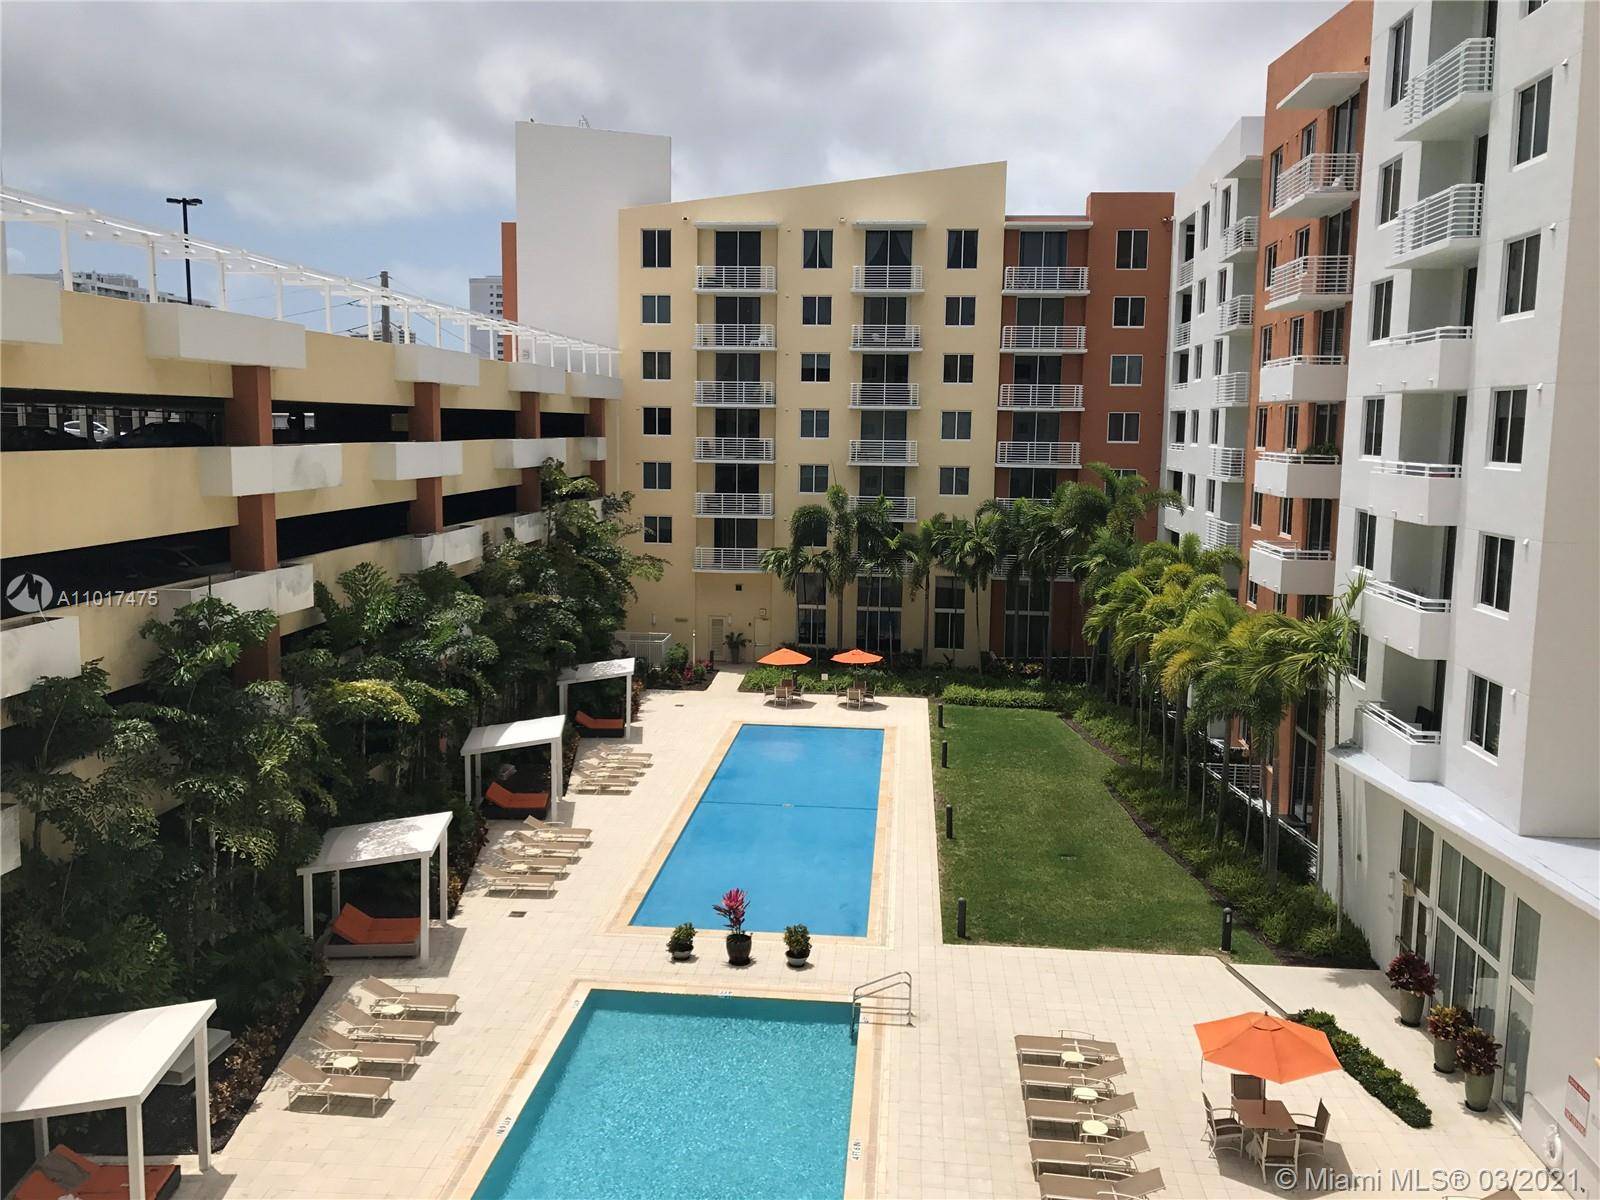 AMAZING UNIT IN THE HEART OF AVENTURA LARGE 2B 2B FULLY FURNISHED WITH POOL VIEWS.